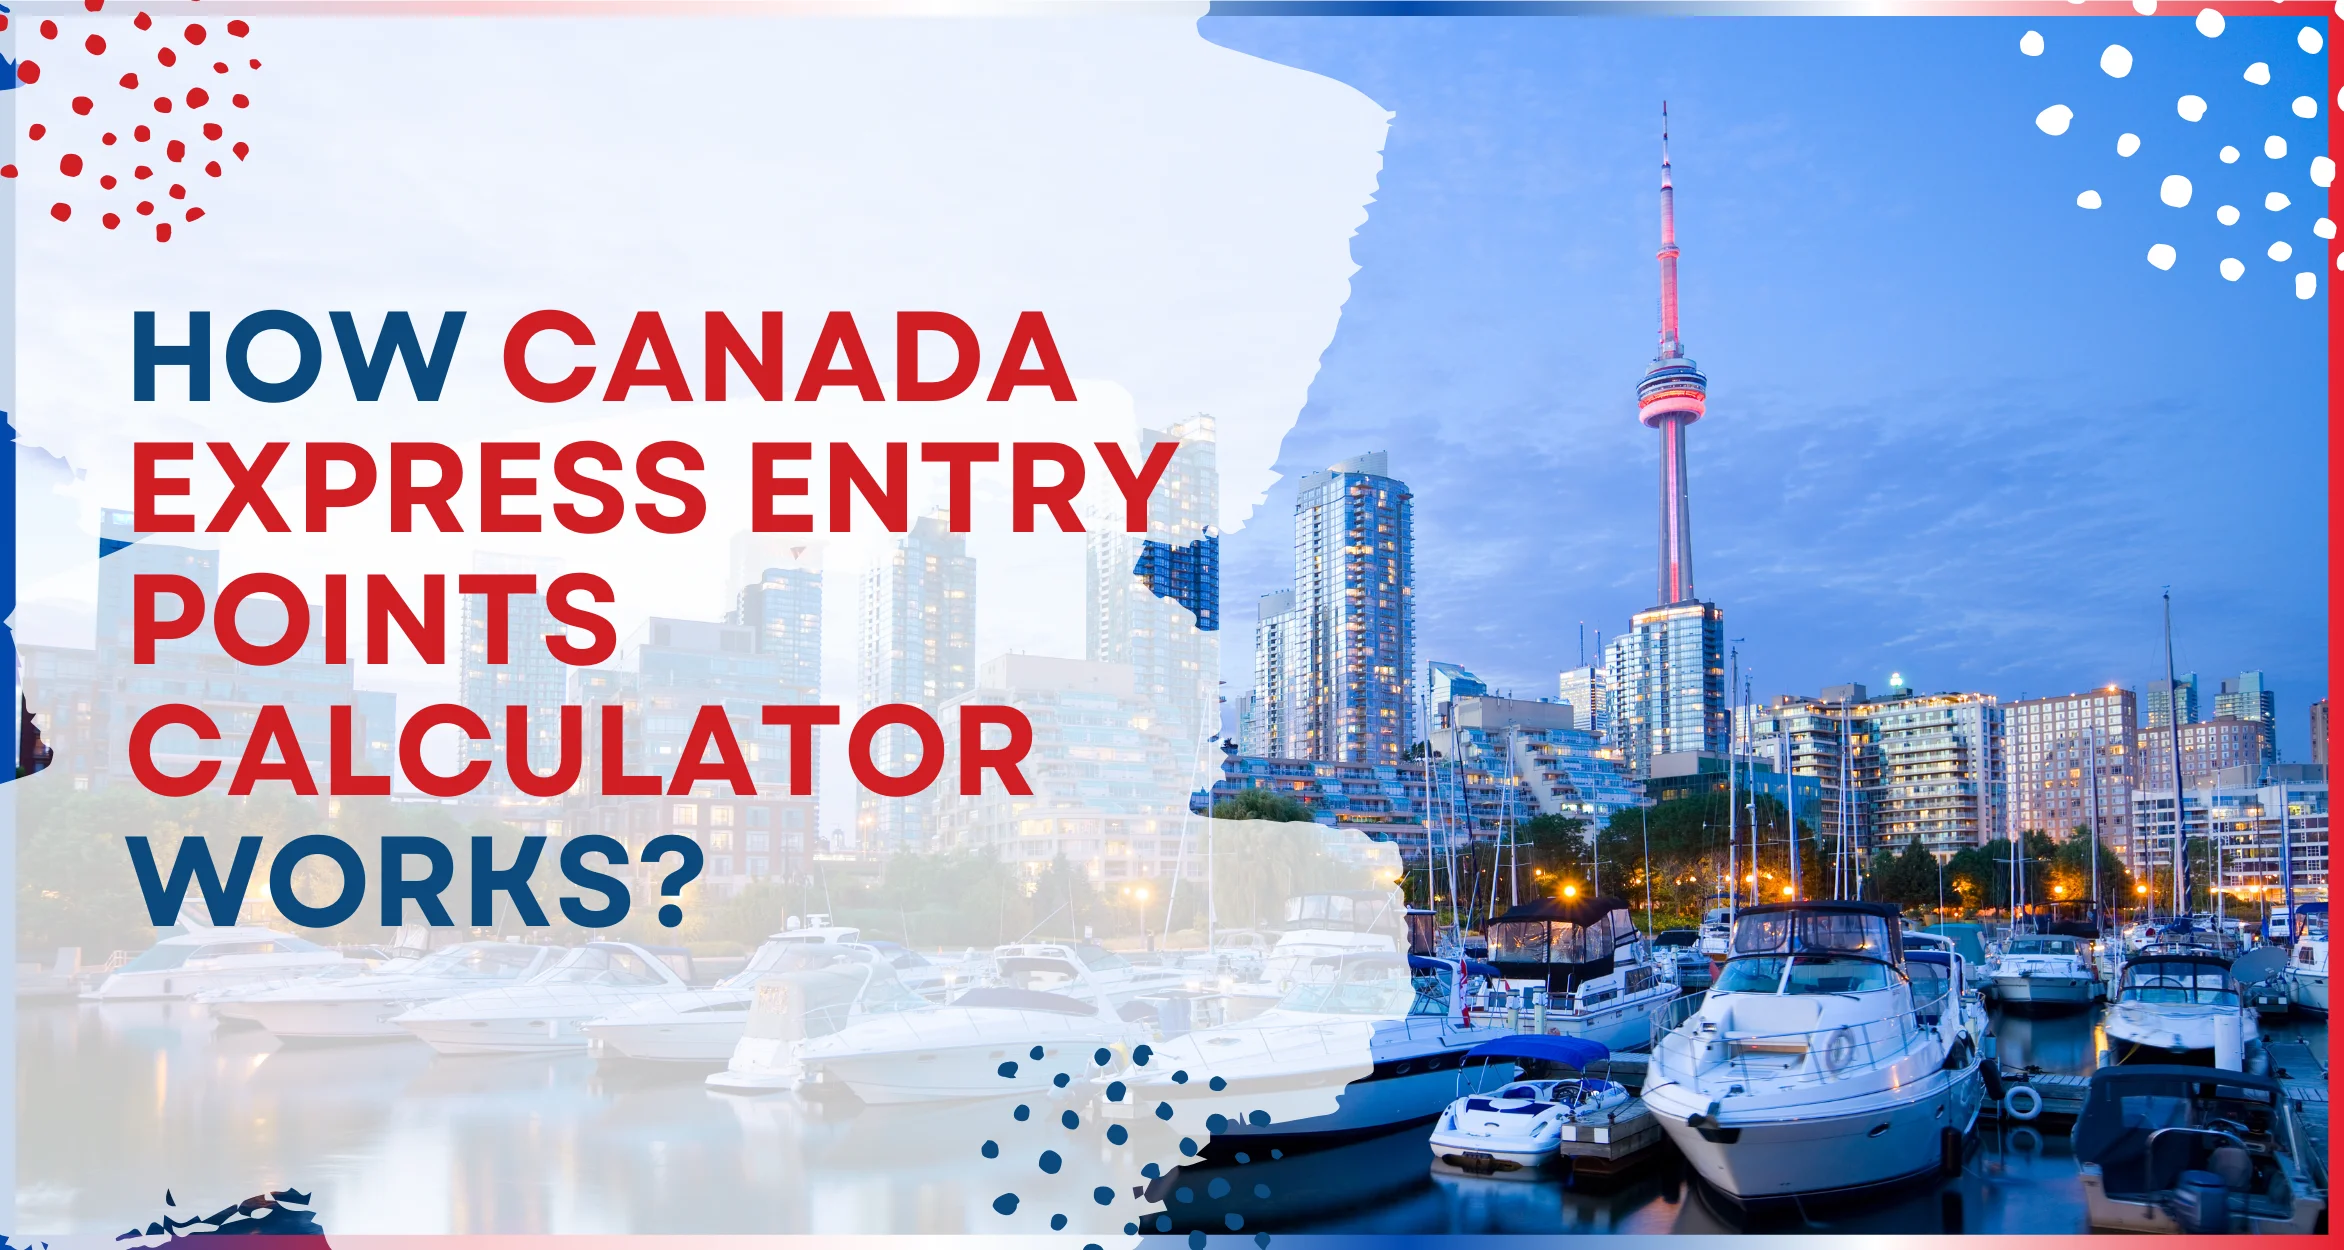 How Canada express entry points calculator works?